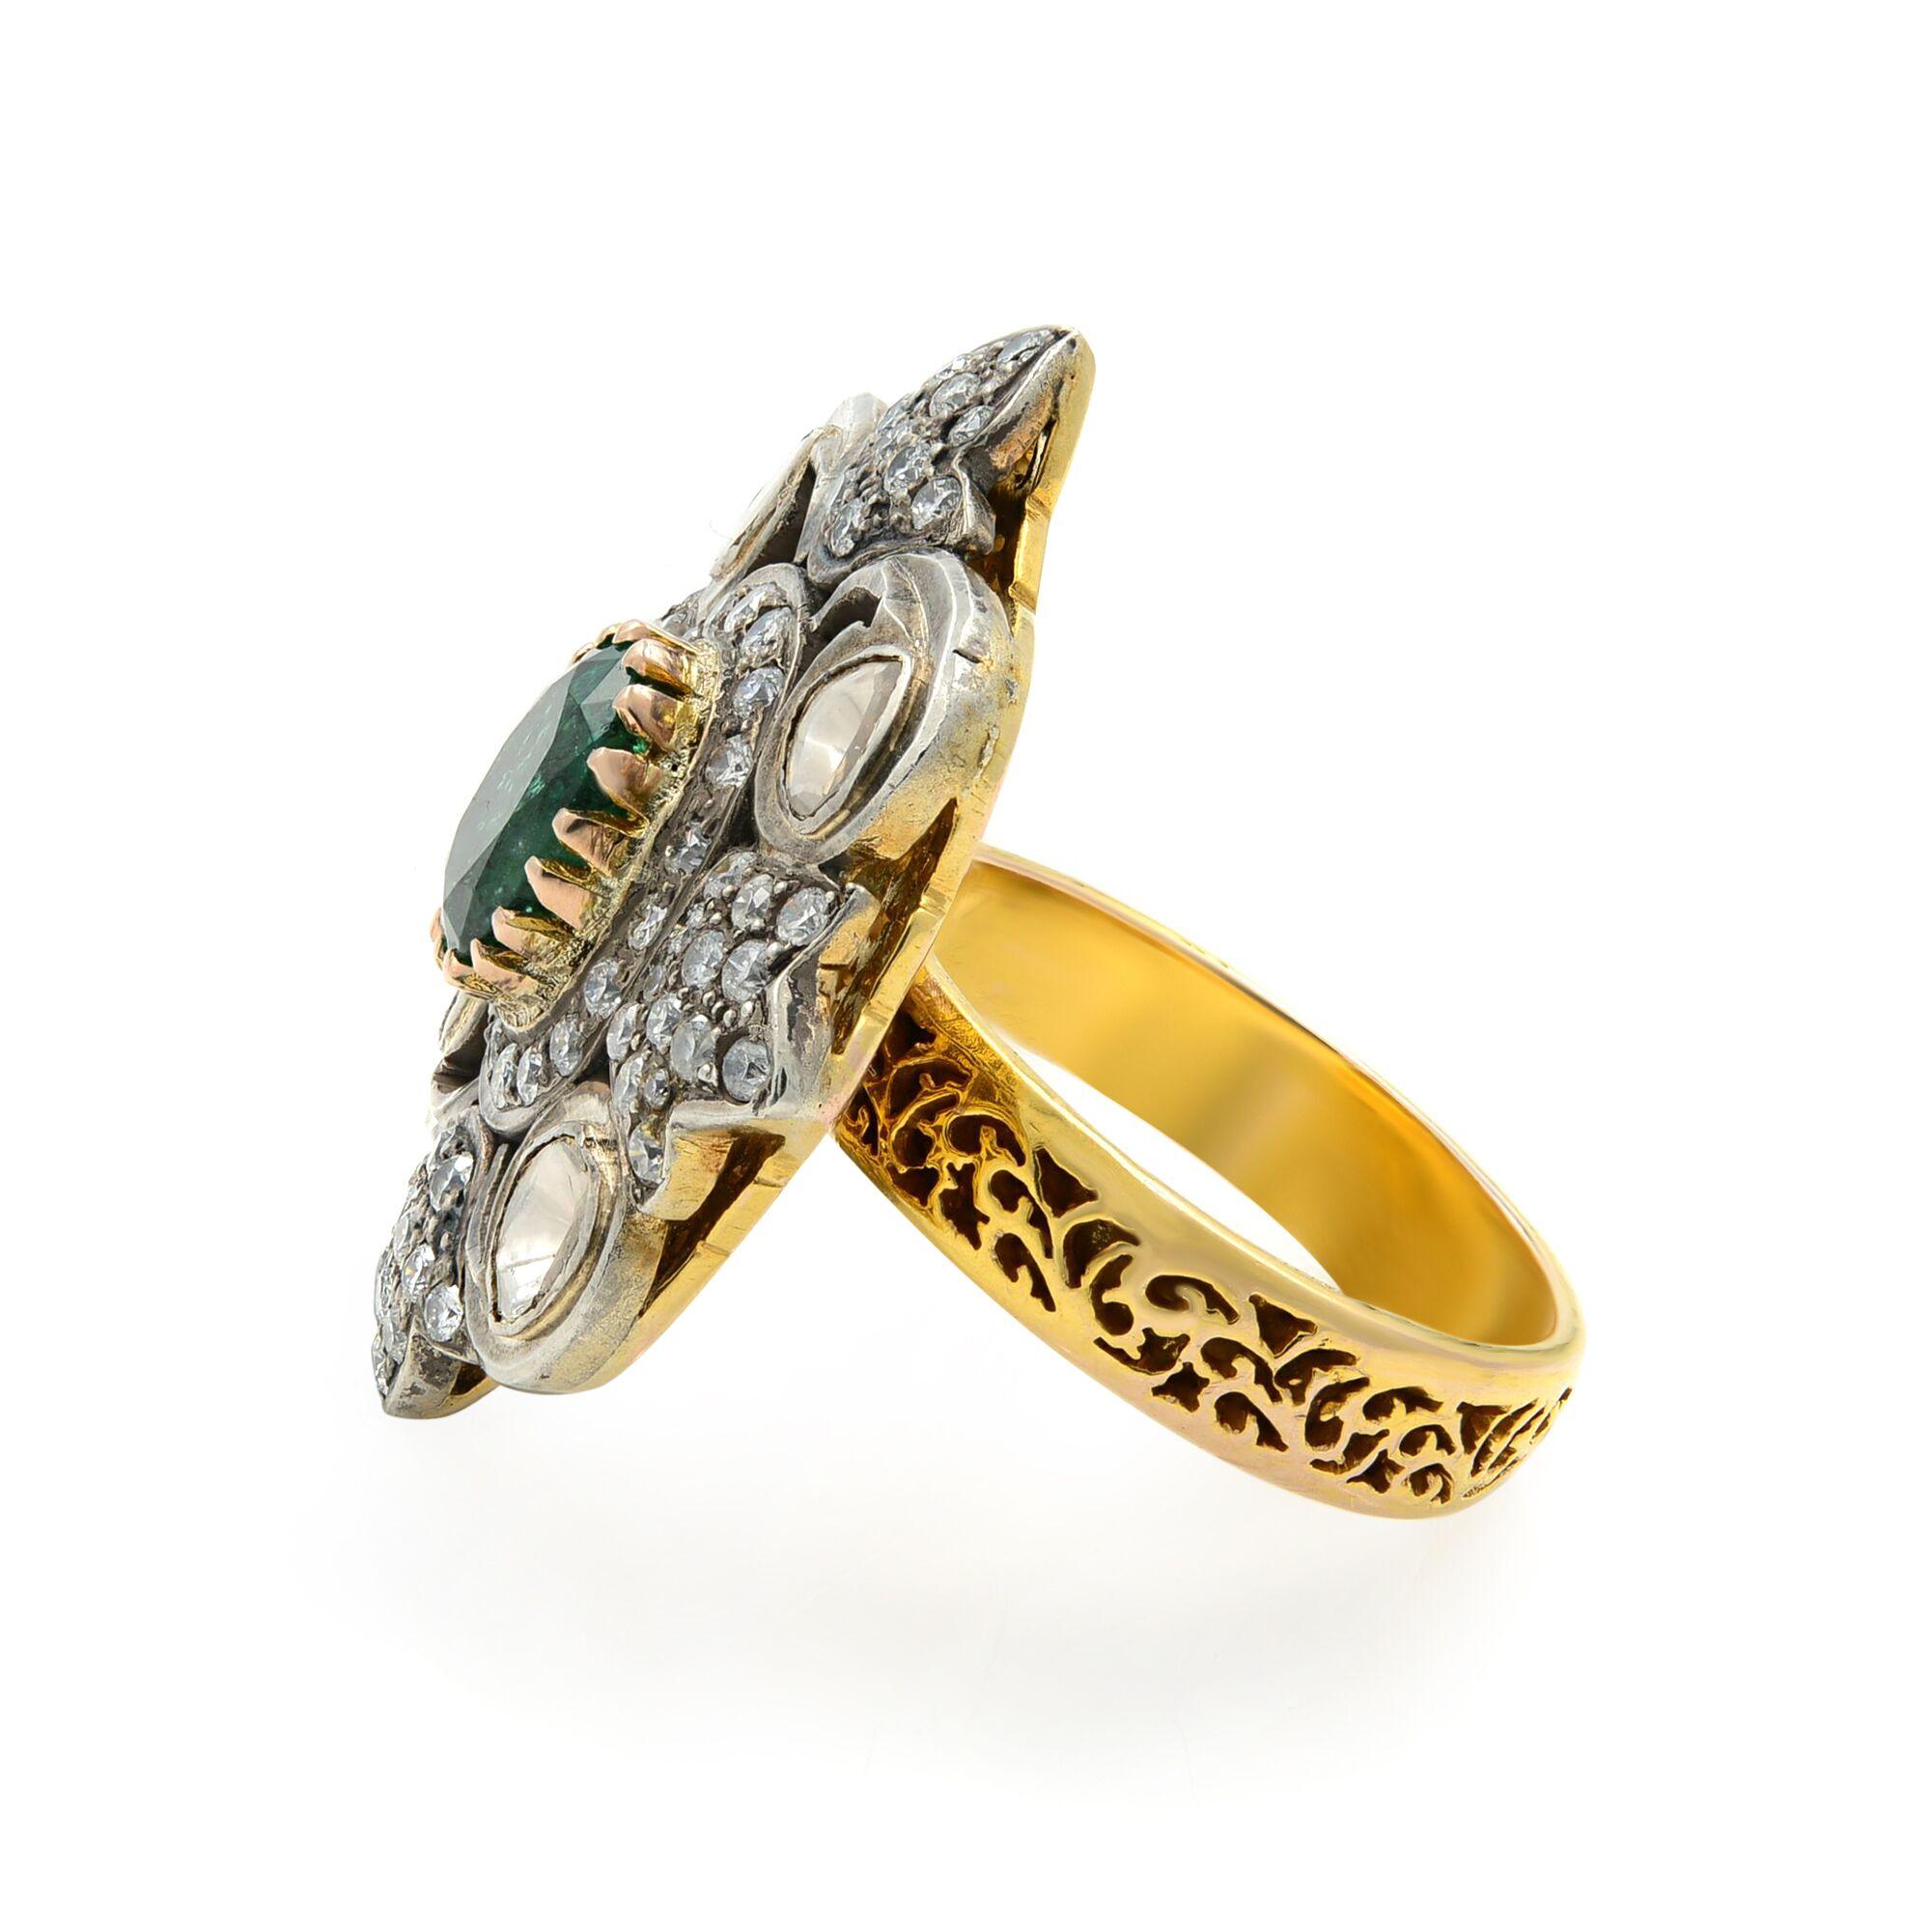 From the 1920s-30s, this elegant oval-shaped emerald is centered with sparkling white smaller diamonds set amidst decoratively. This fabulous Art Deco ring is a rare and ravishing beauty. The top of the ring is 1 inch long. Currently, the ring size